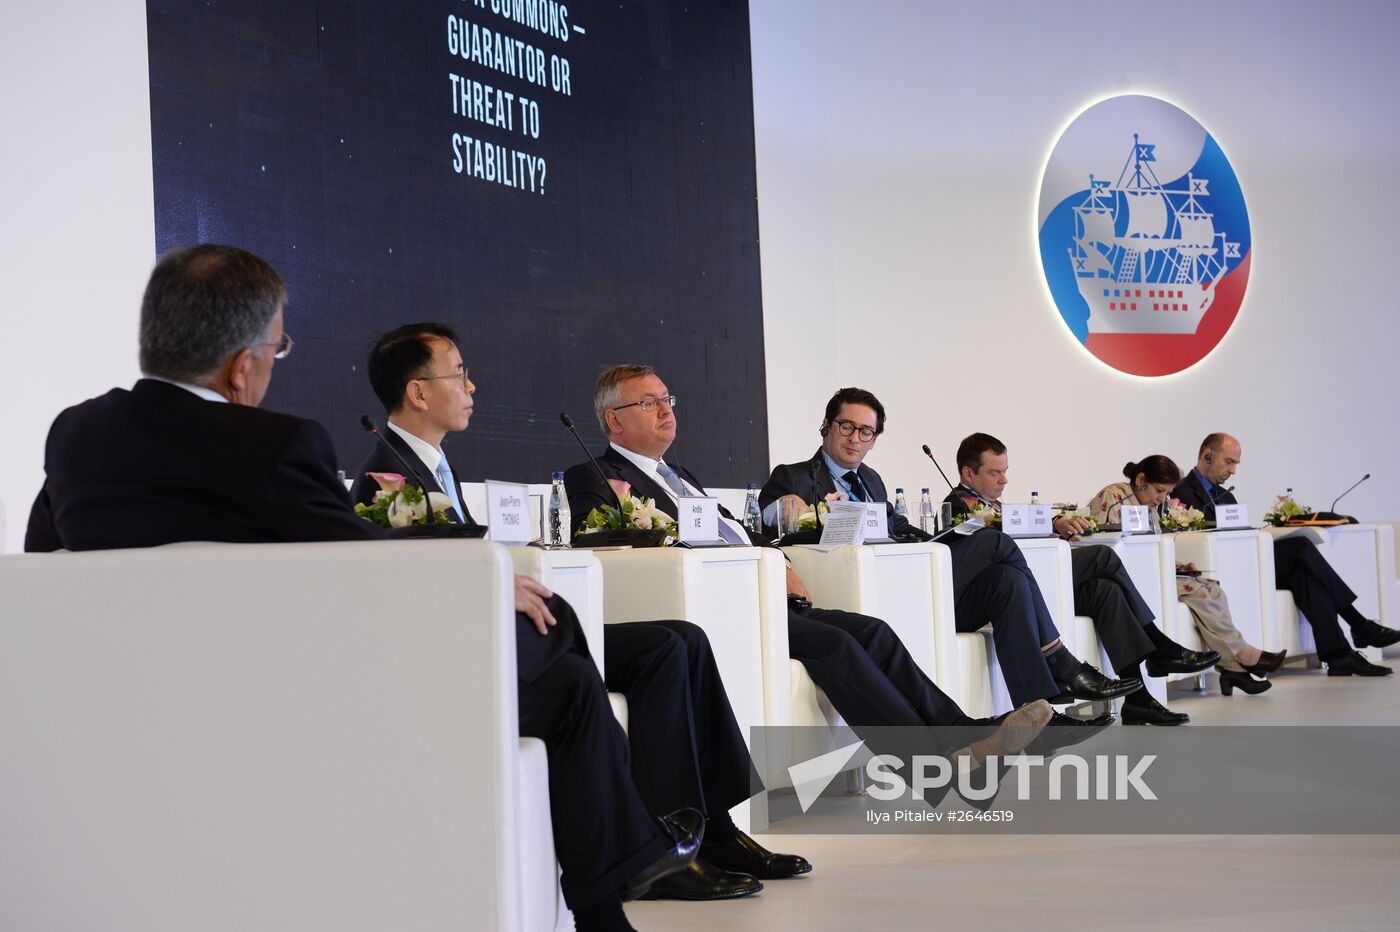 Global Finance as a Commons – Guarantor or Threat to Stability? panel session at SPIEF 2015